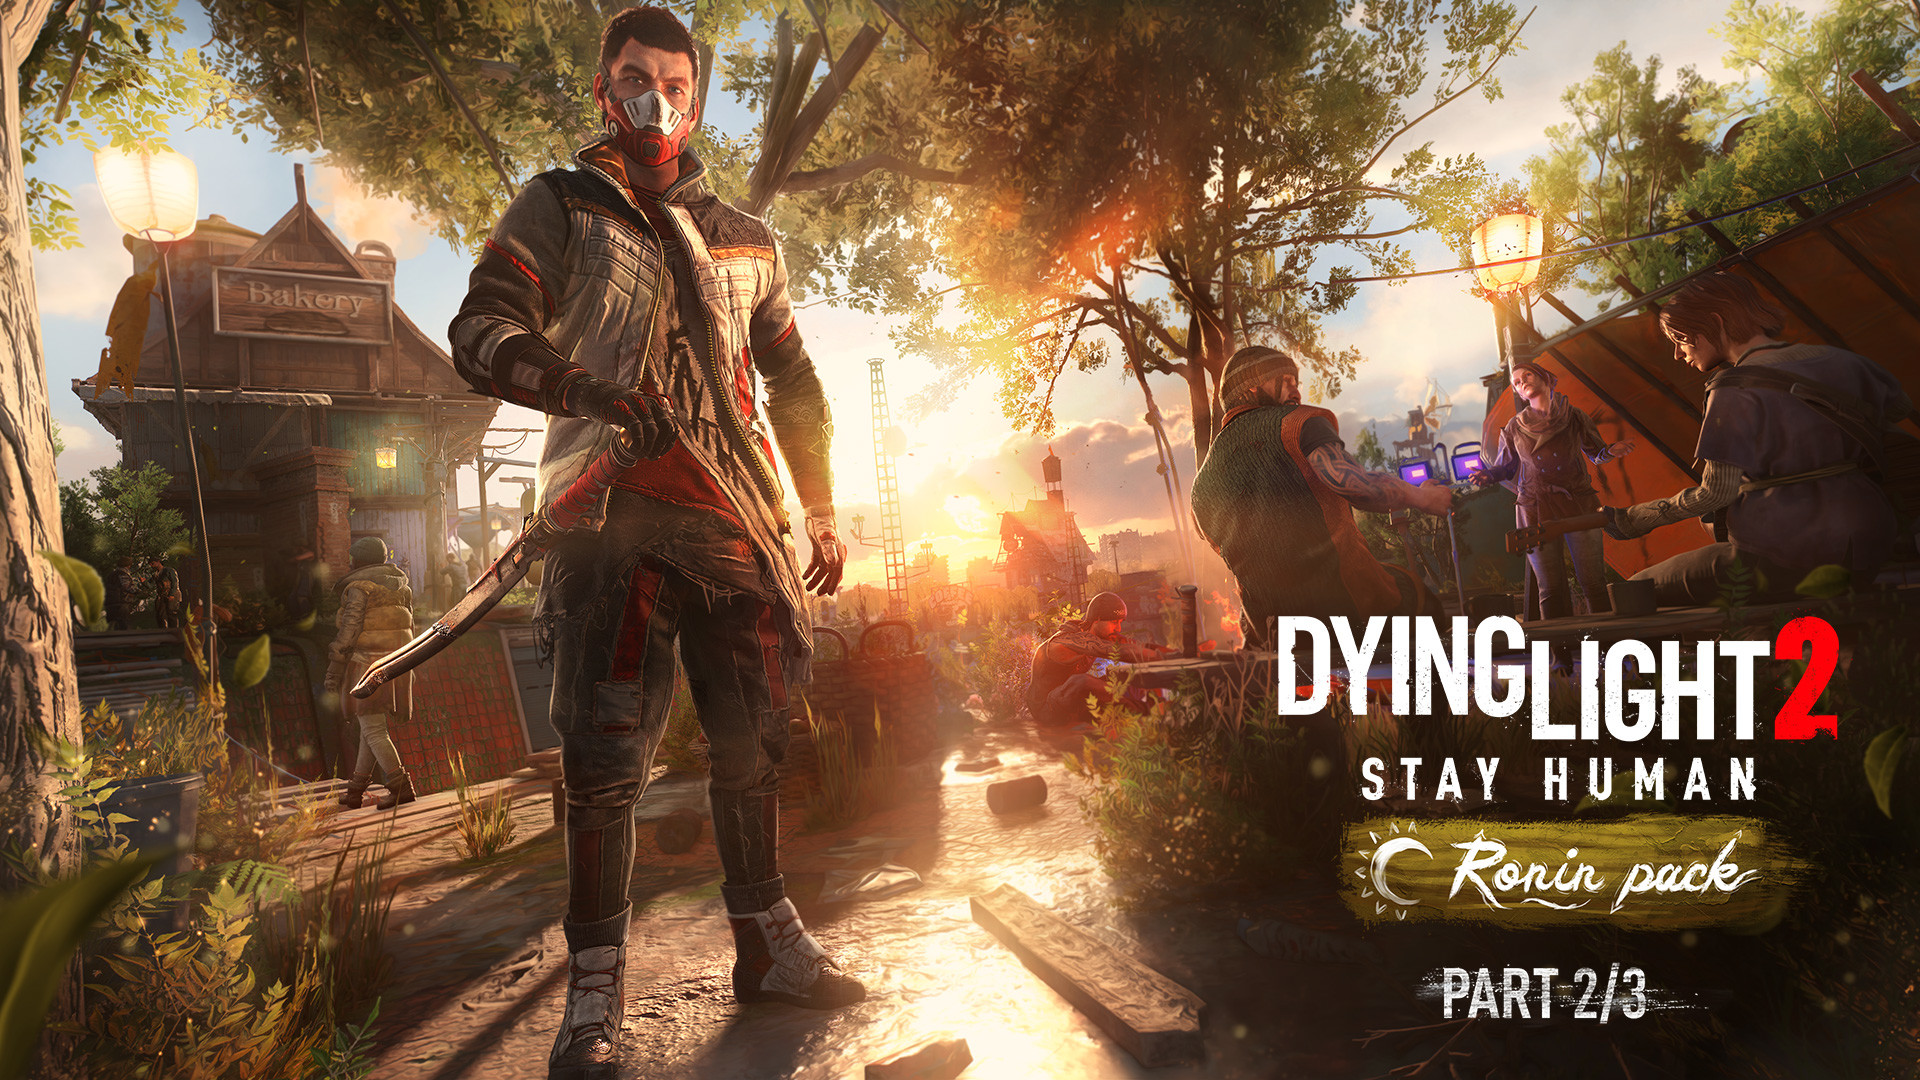 Dying Light 2 Stay Human: Ronin Pack—Part 2/3 Featured Screenshot #1